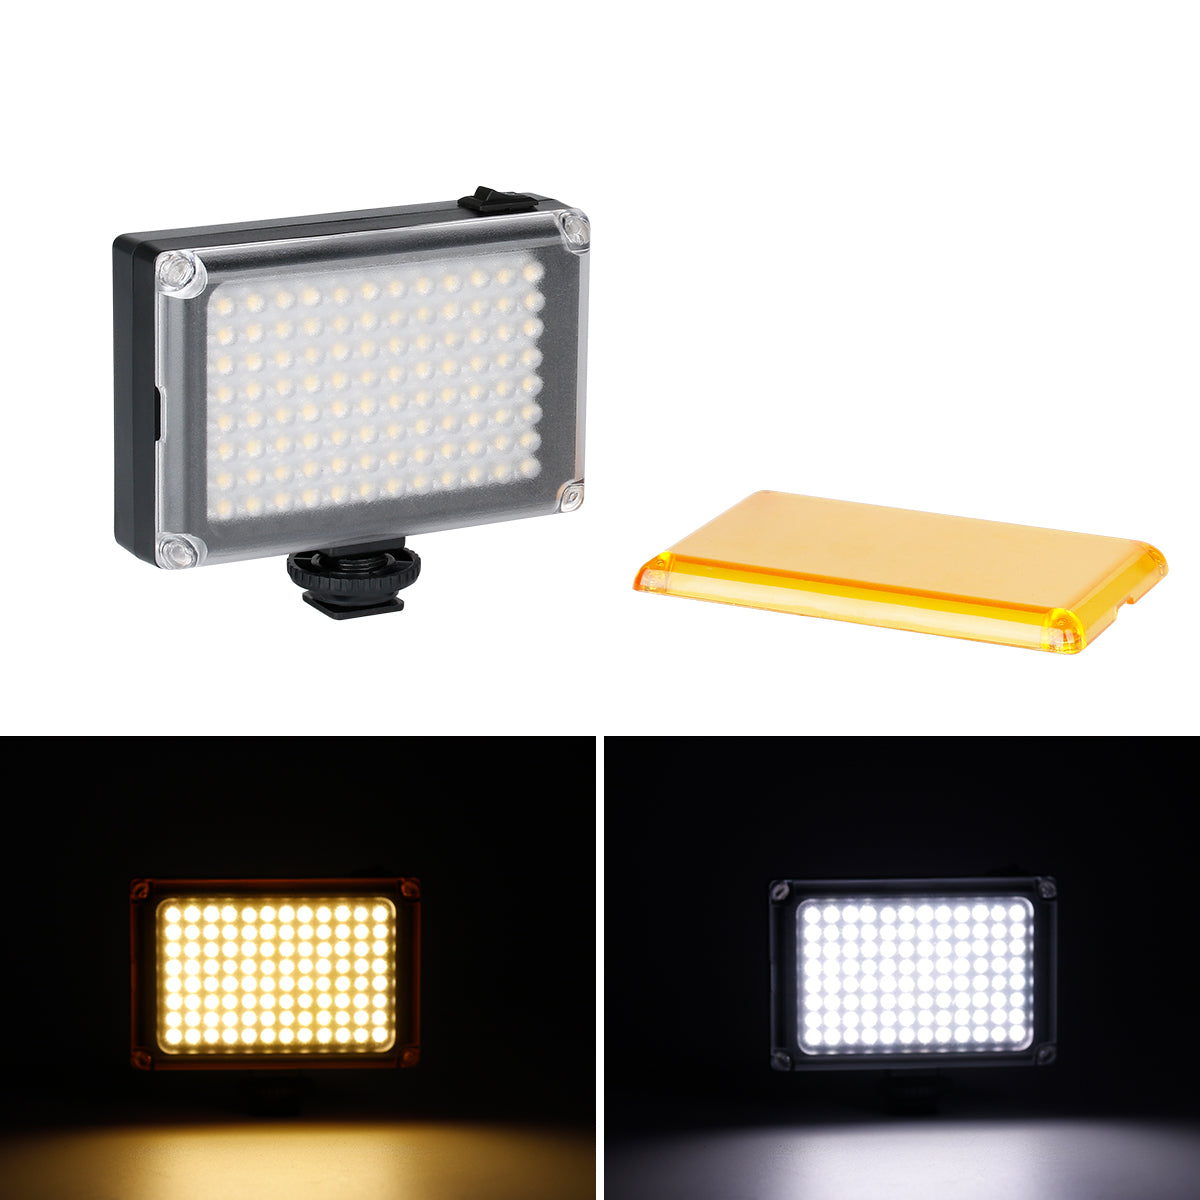 Uniqkart 96 LED Video Light Dimmable Bi-color Temperature Photographic Lighting for Youtube Live Streaming